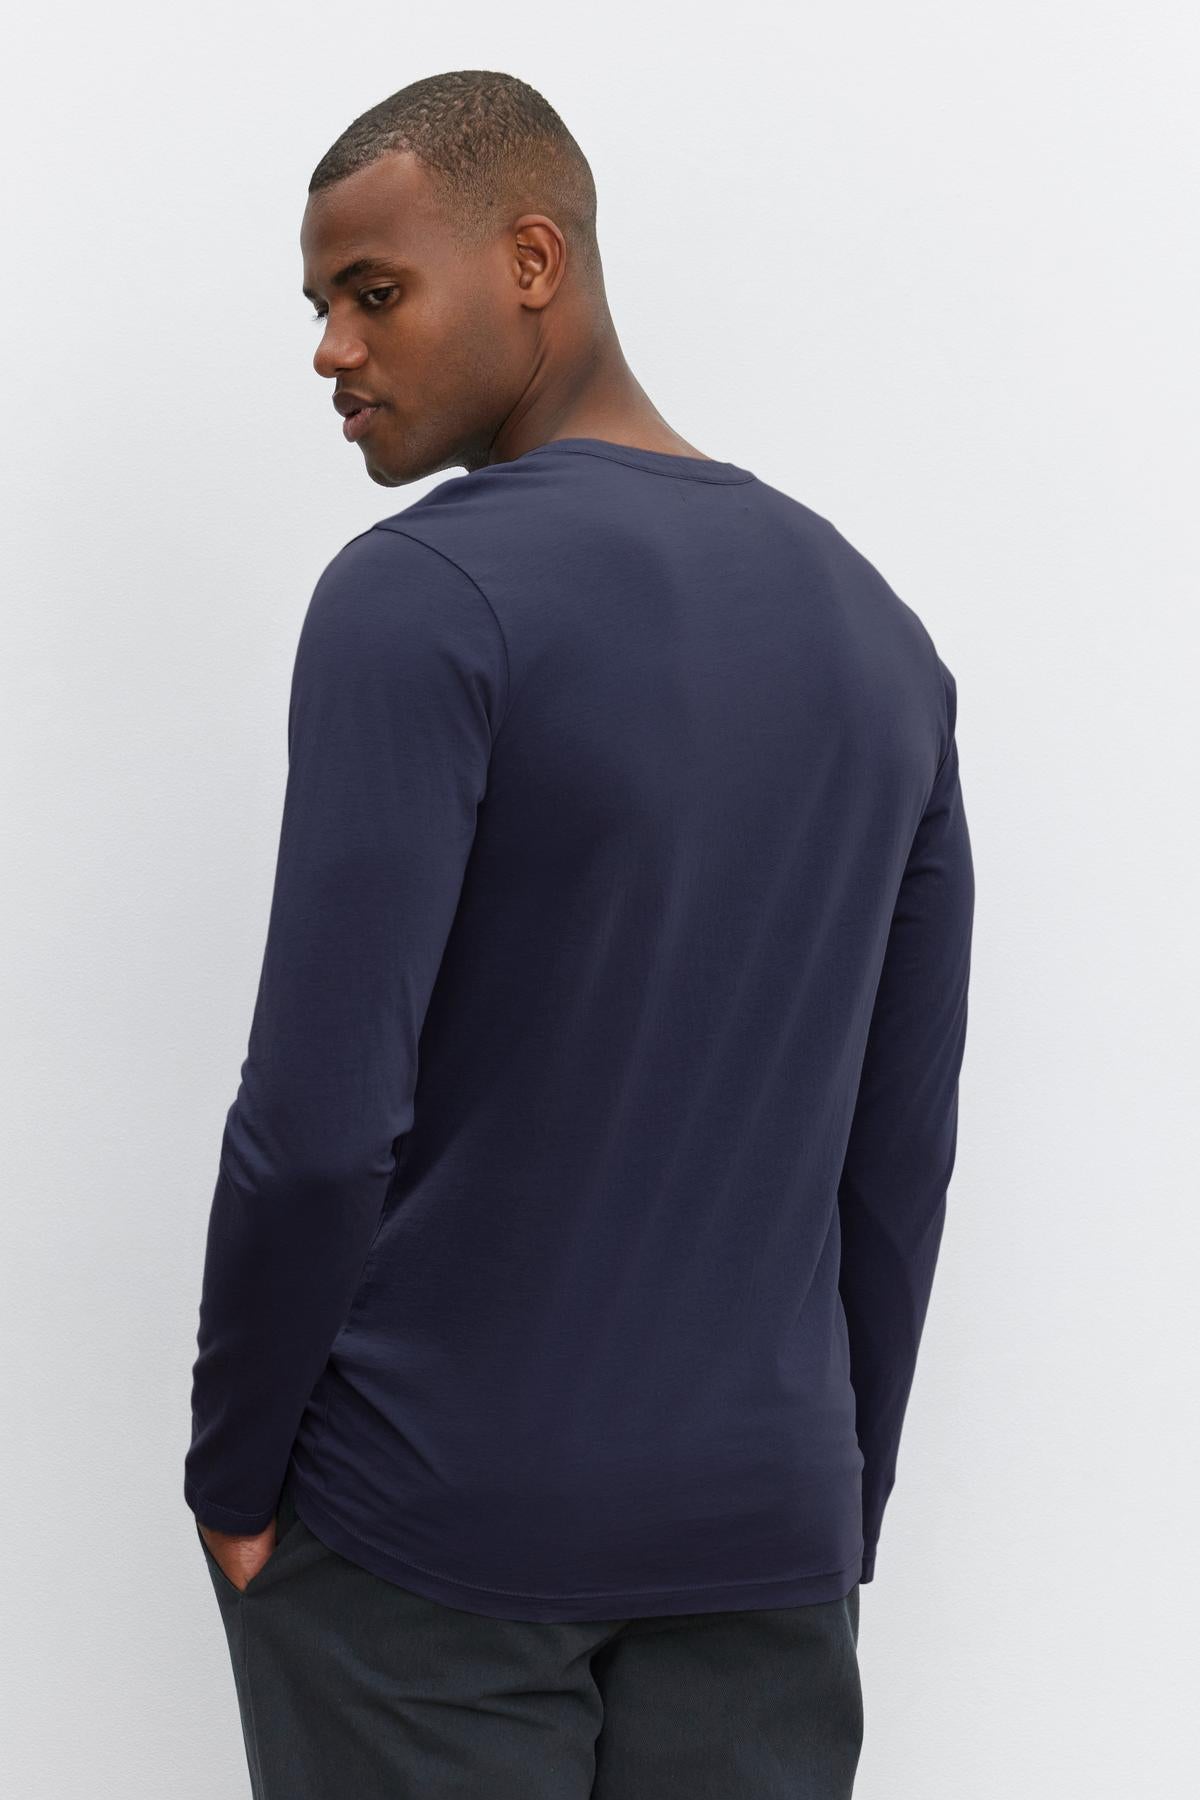 This man is wearing a Velvet by Graham & Spencer ALVARO COTTON JERSEY HENLEY, giving a glimpse of his back.-36273890590913